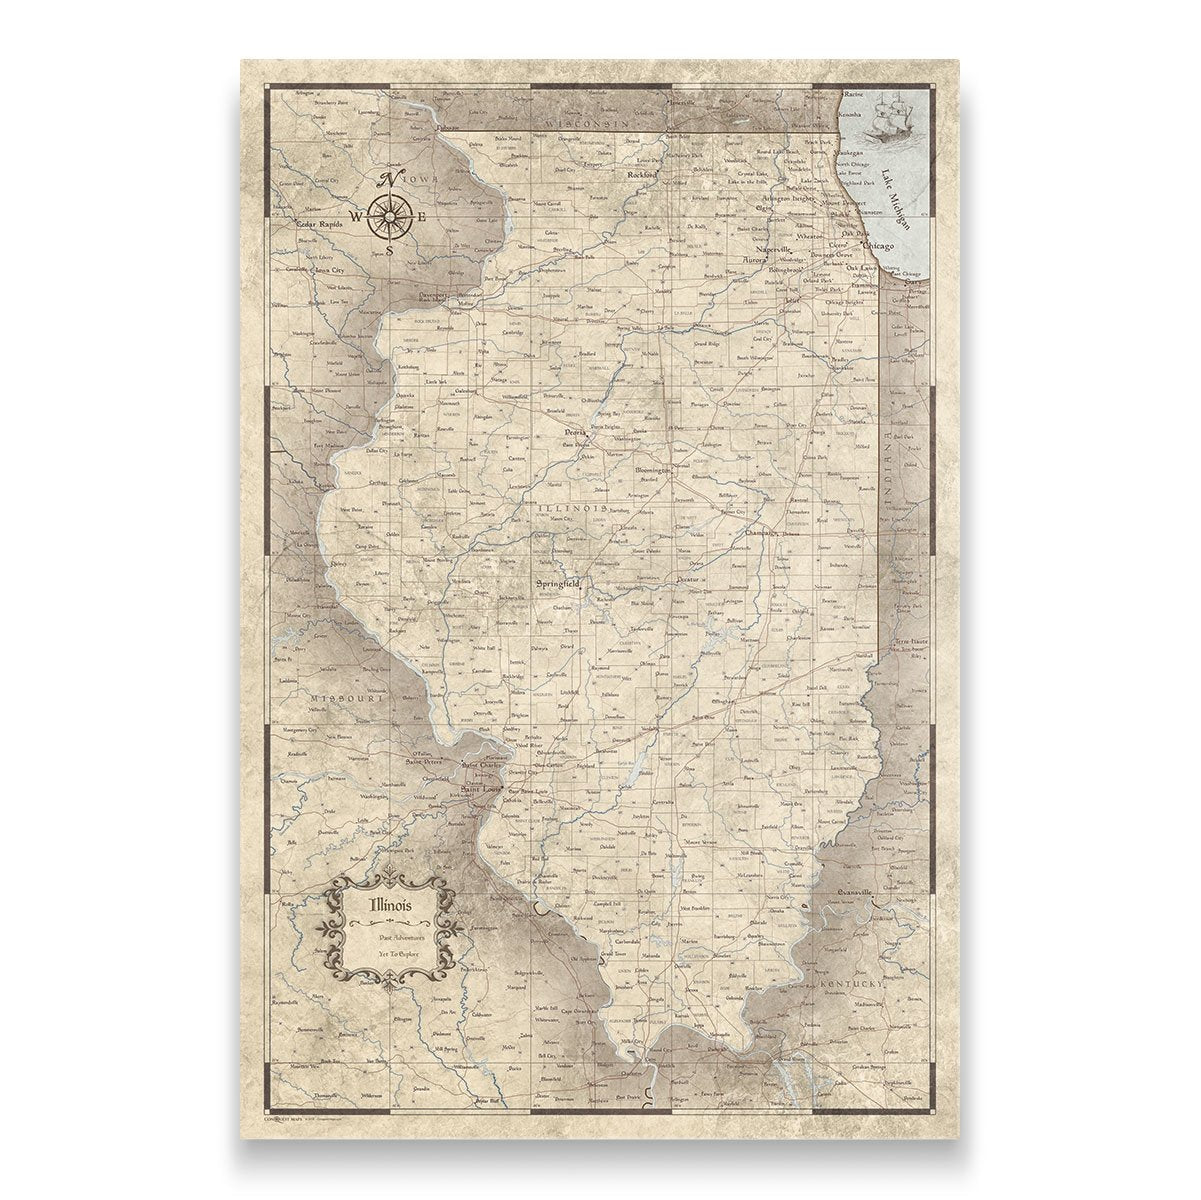 Personalized Illinois Travel Maps For Your Home